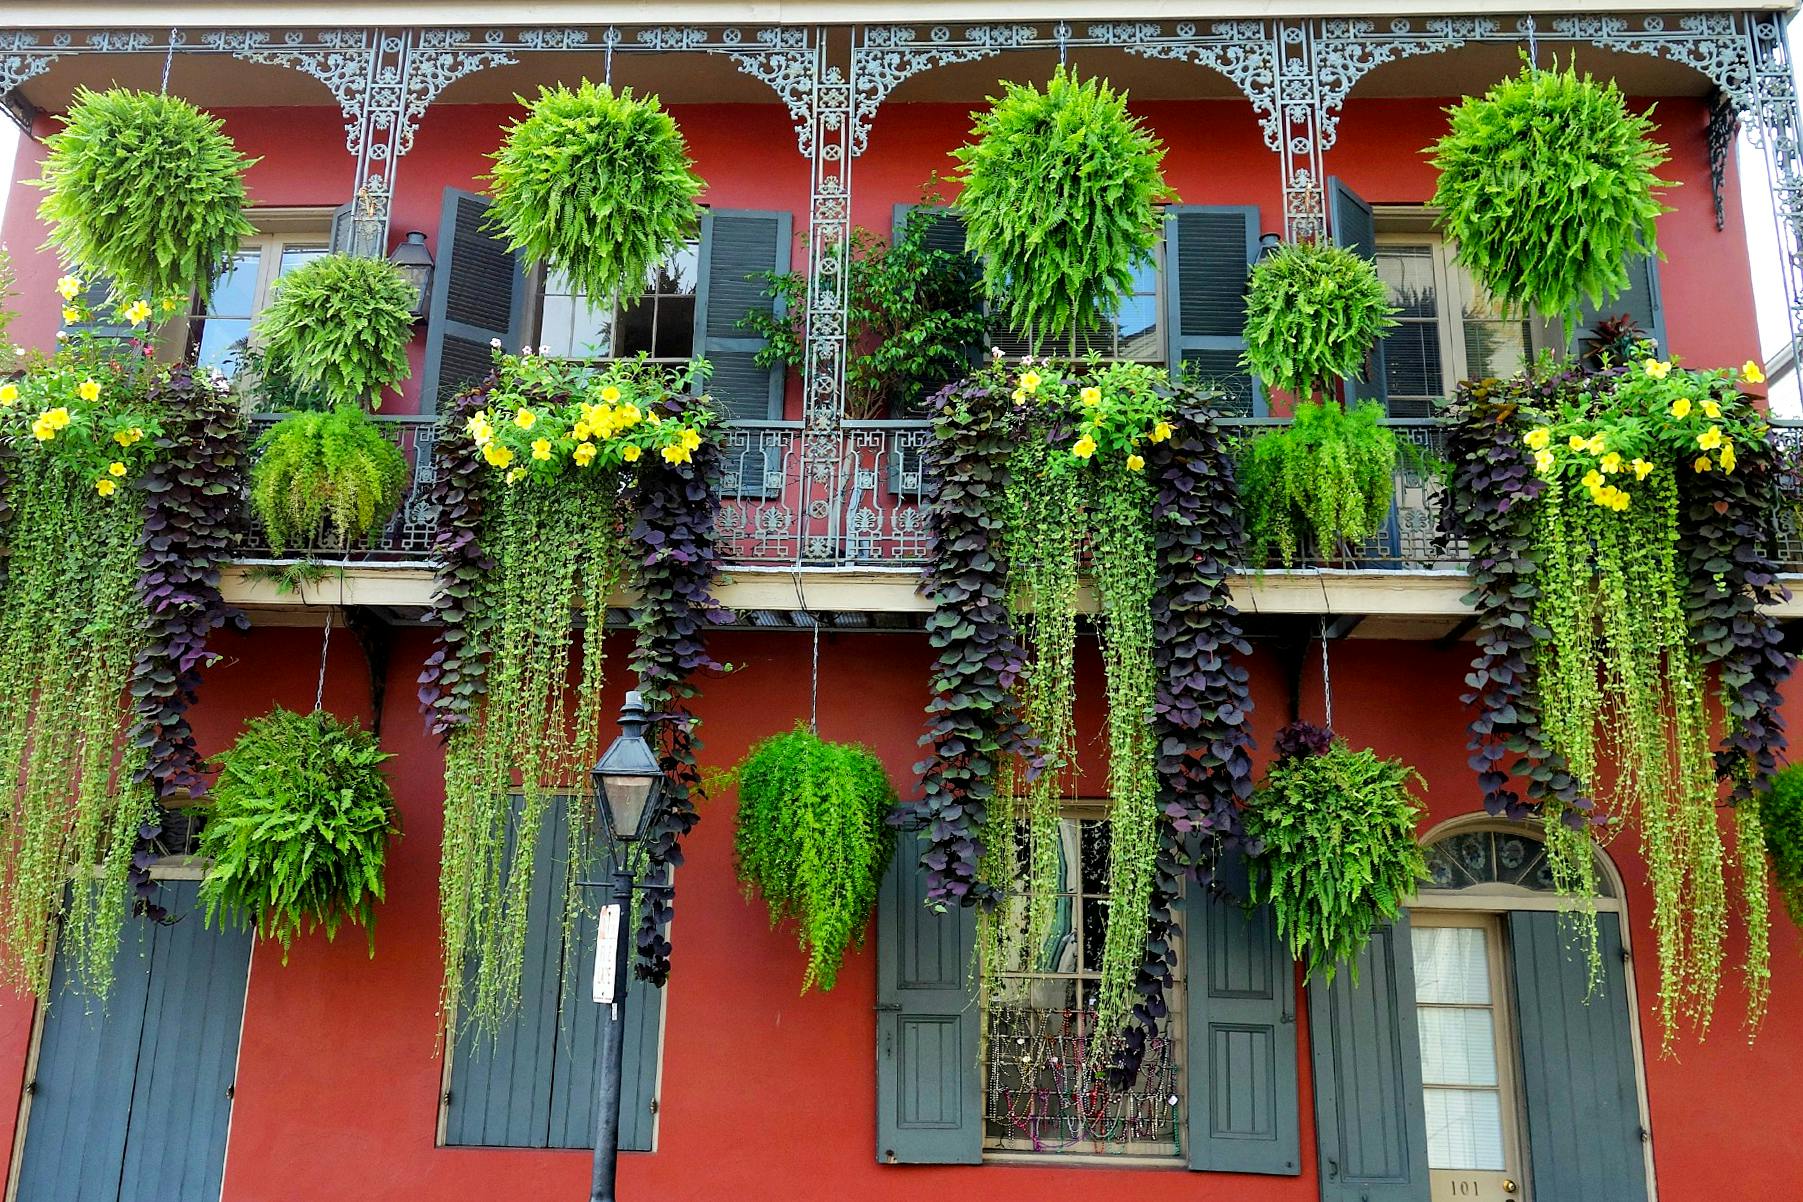 Old red building with balconies decorated with hanging plants in the French Quarter in New Orleans.